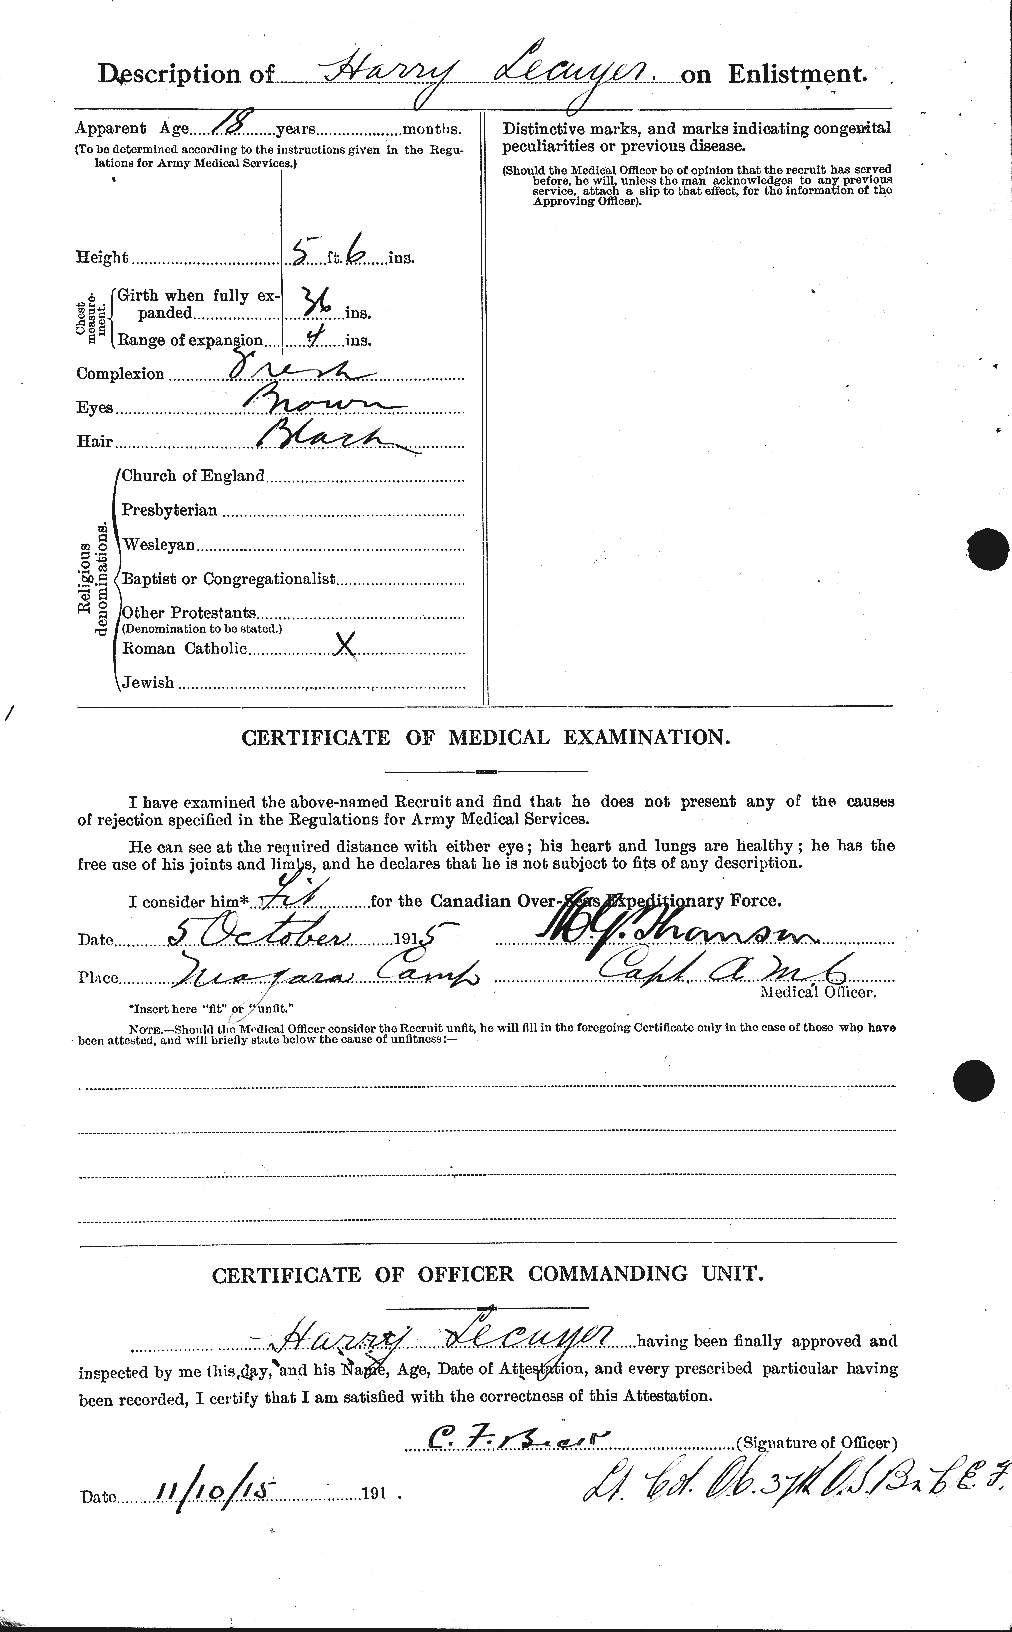 Personnel Records of the First World War - CEF 456301b